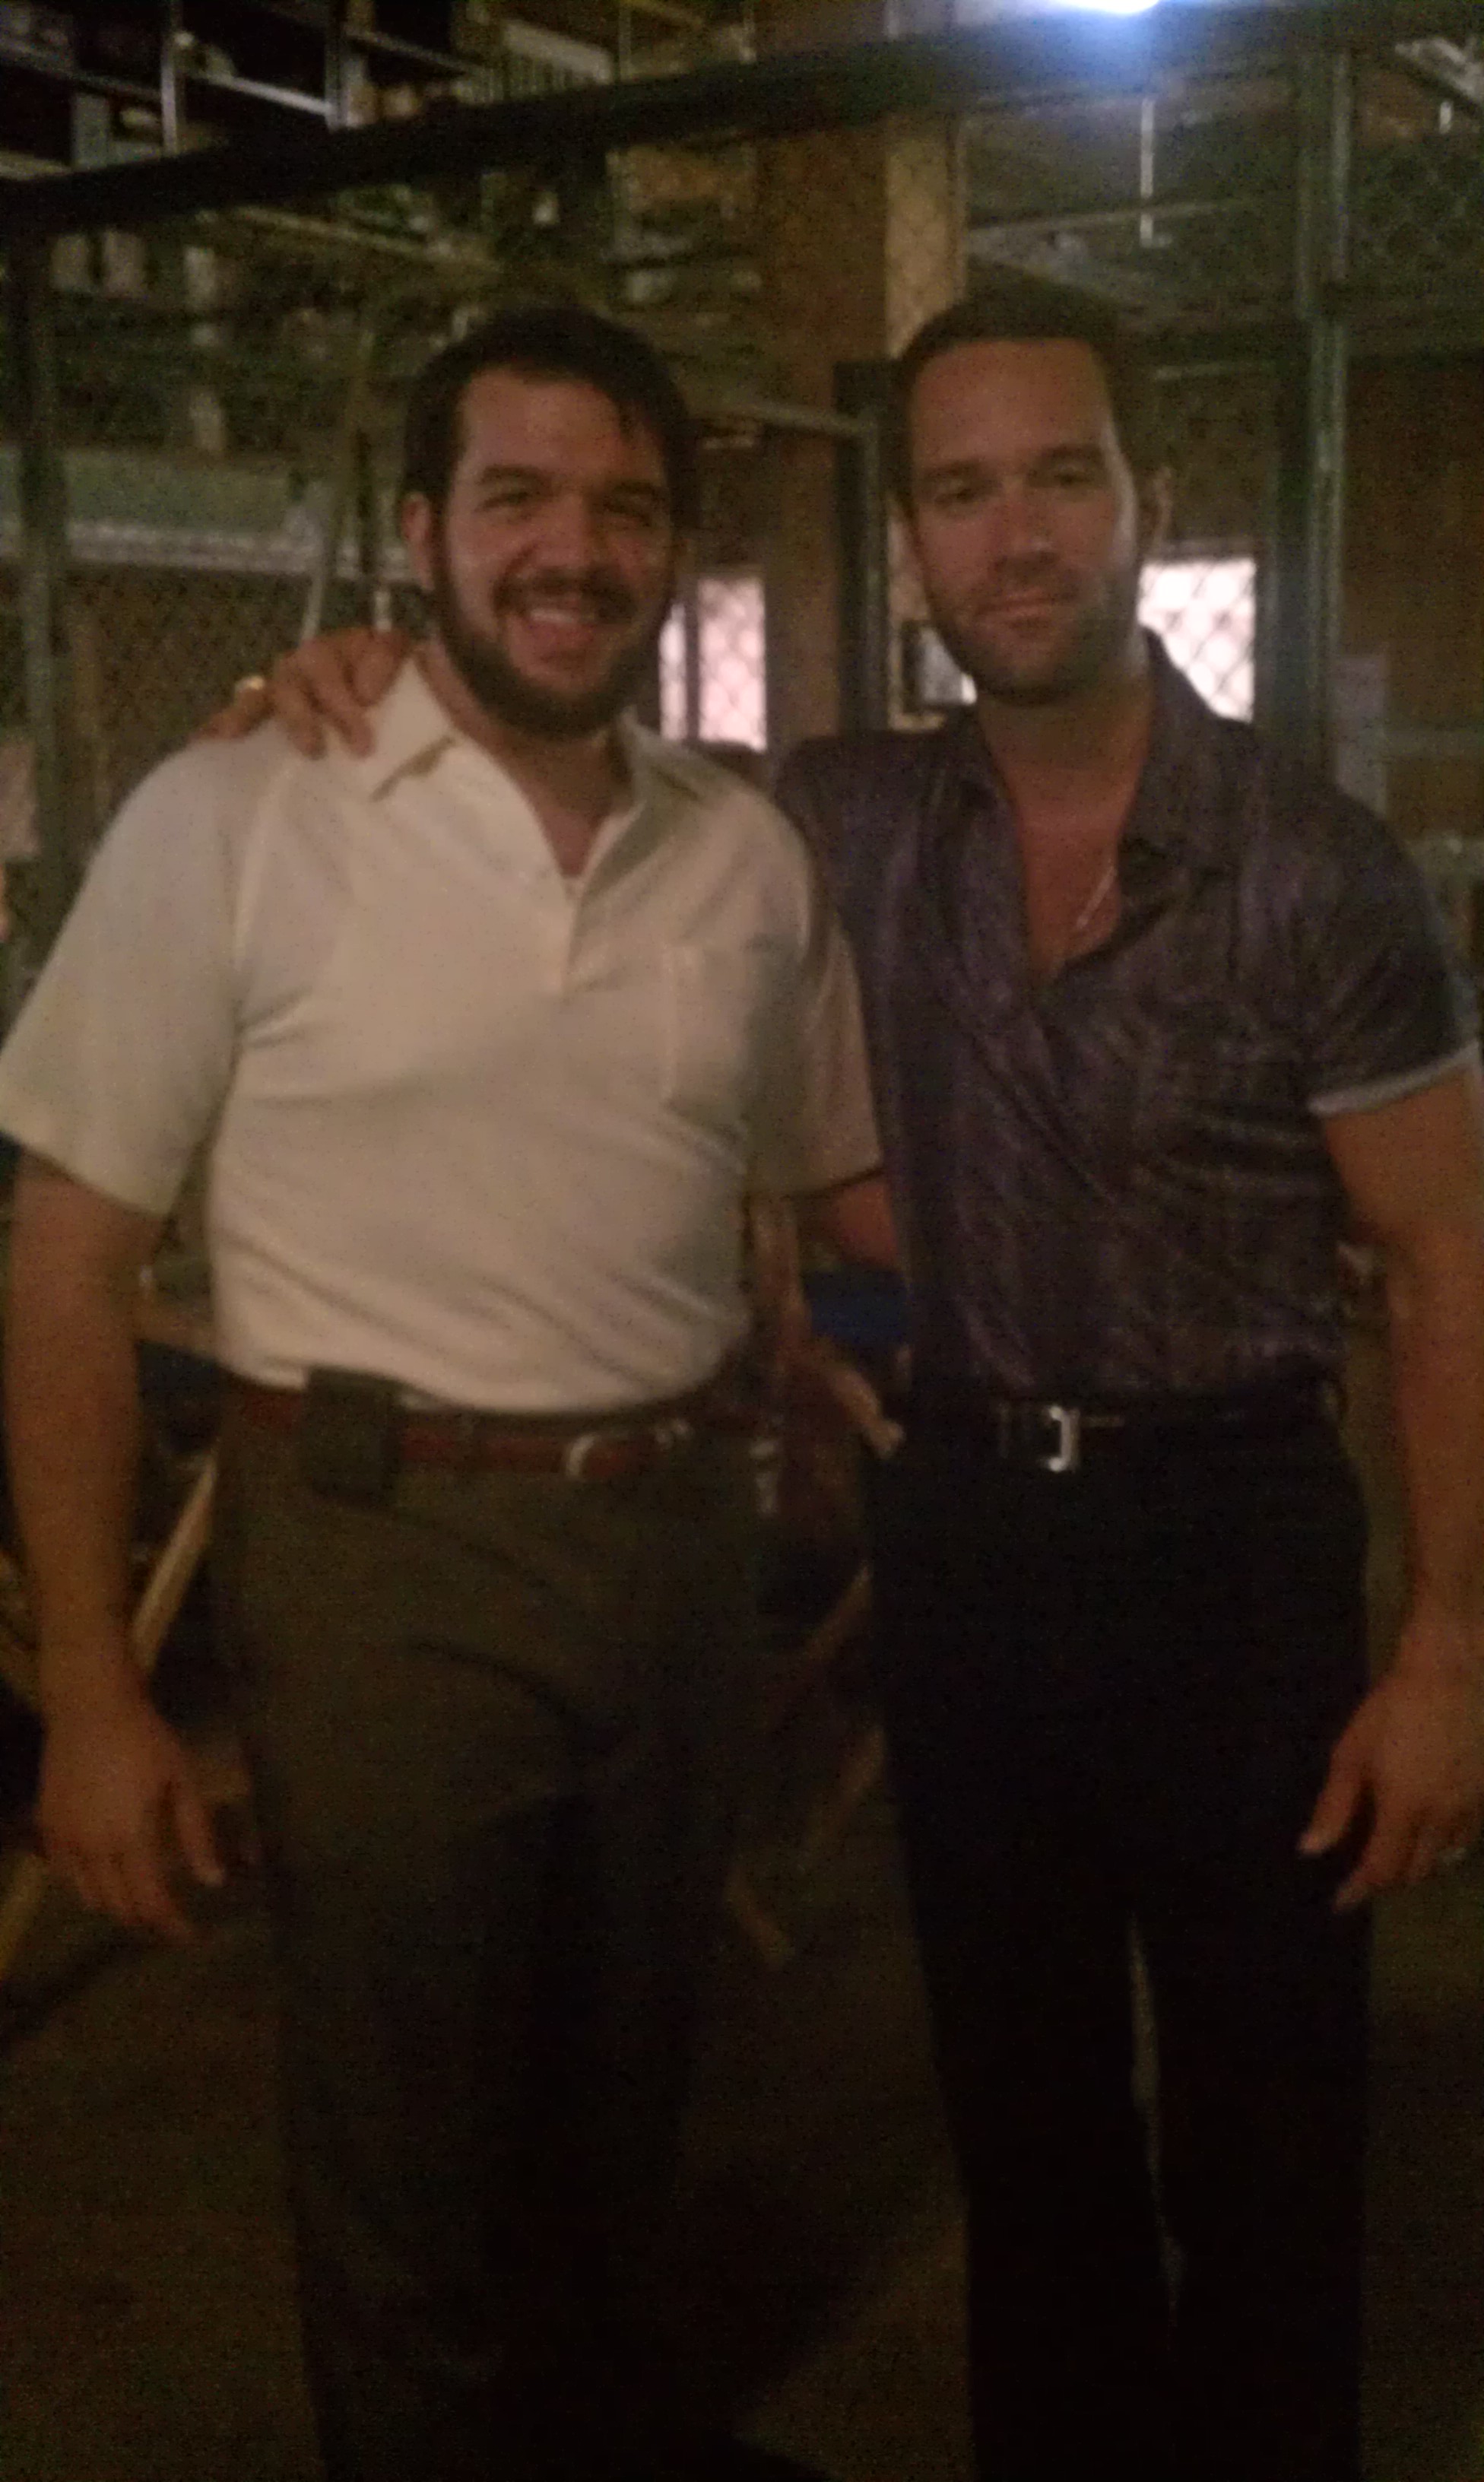 On Empire State set with Chris Diamantopoulos